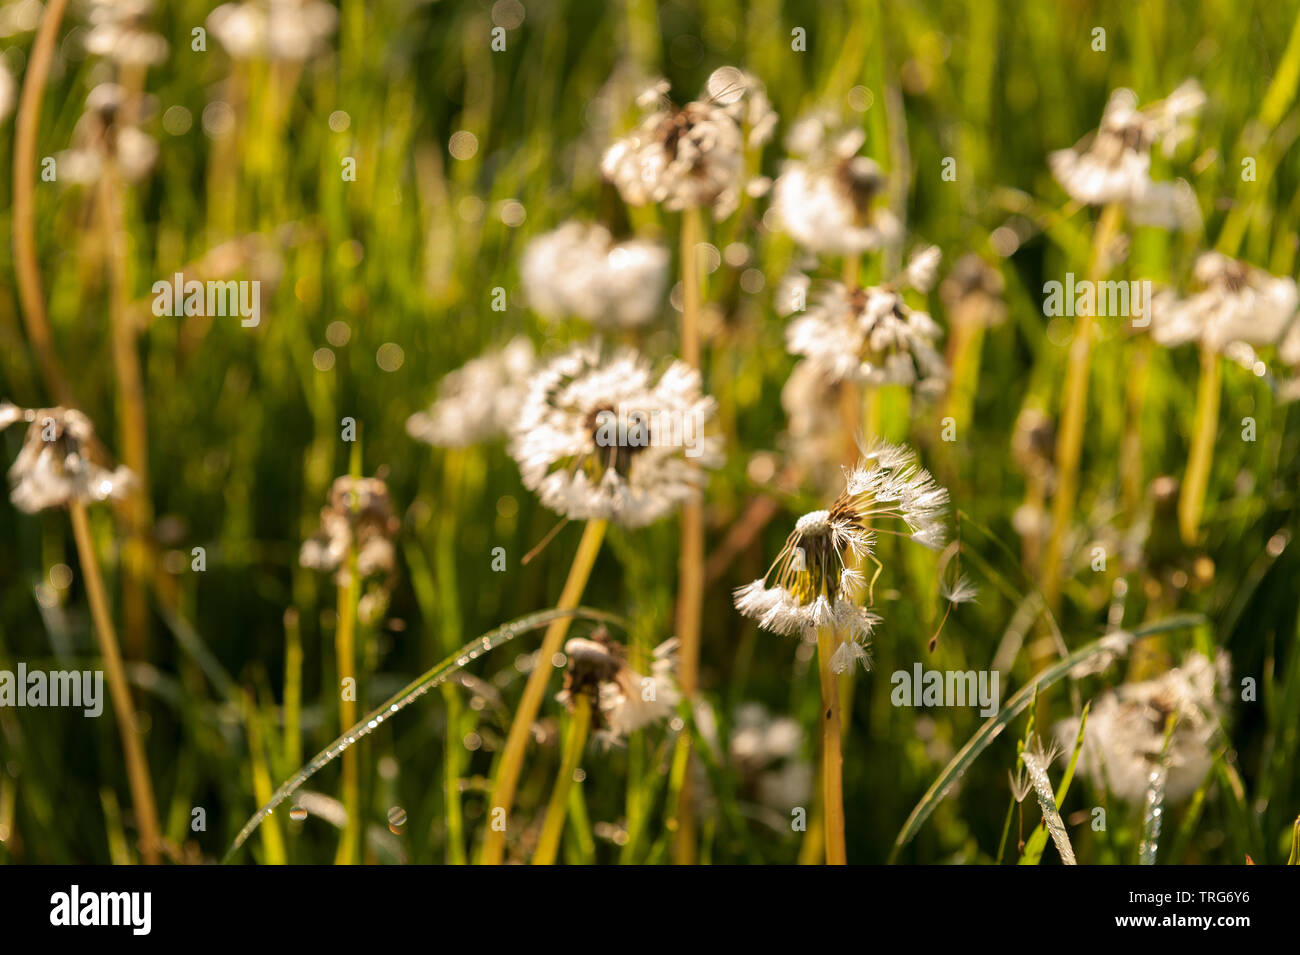 The glowing ‘clock’ seedheads of dandelion, Taraxacum officinalis, grow quickly in a lawn in need of cutting at dawn Stock Photo